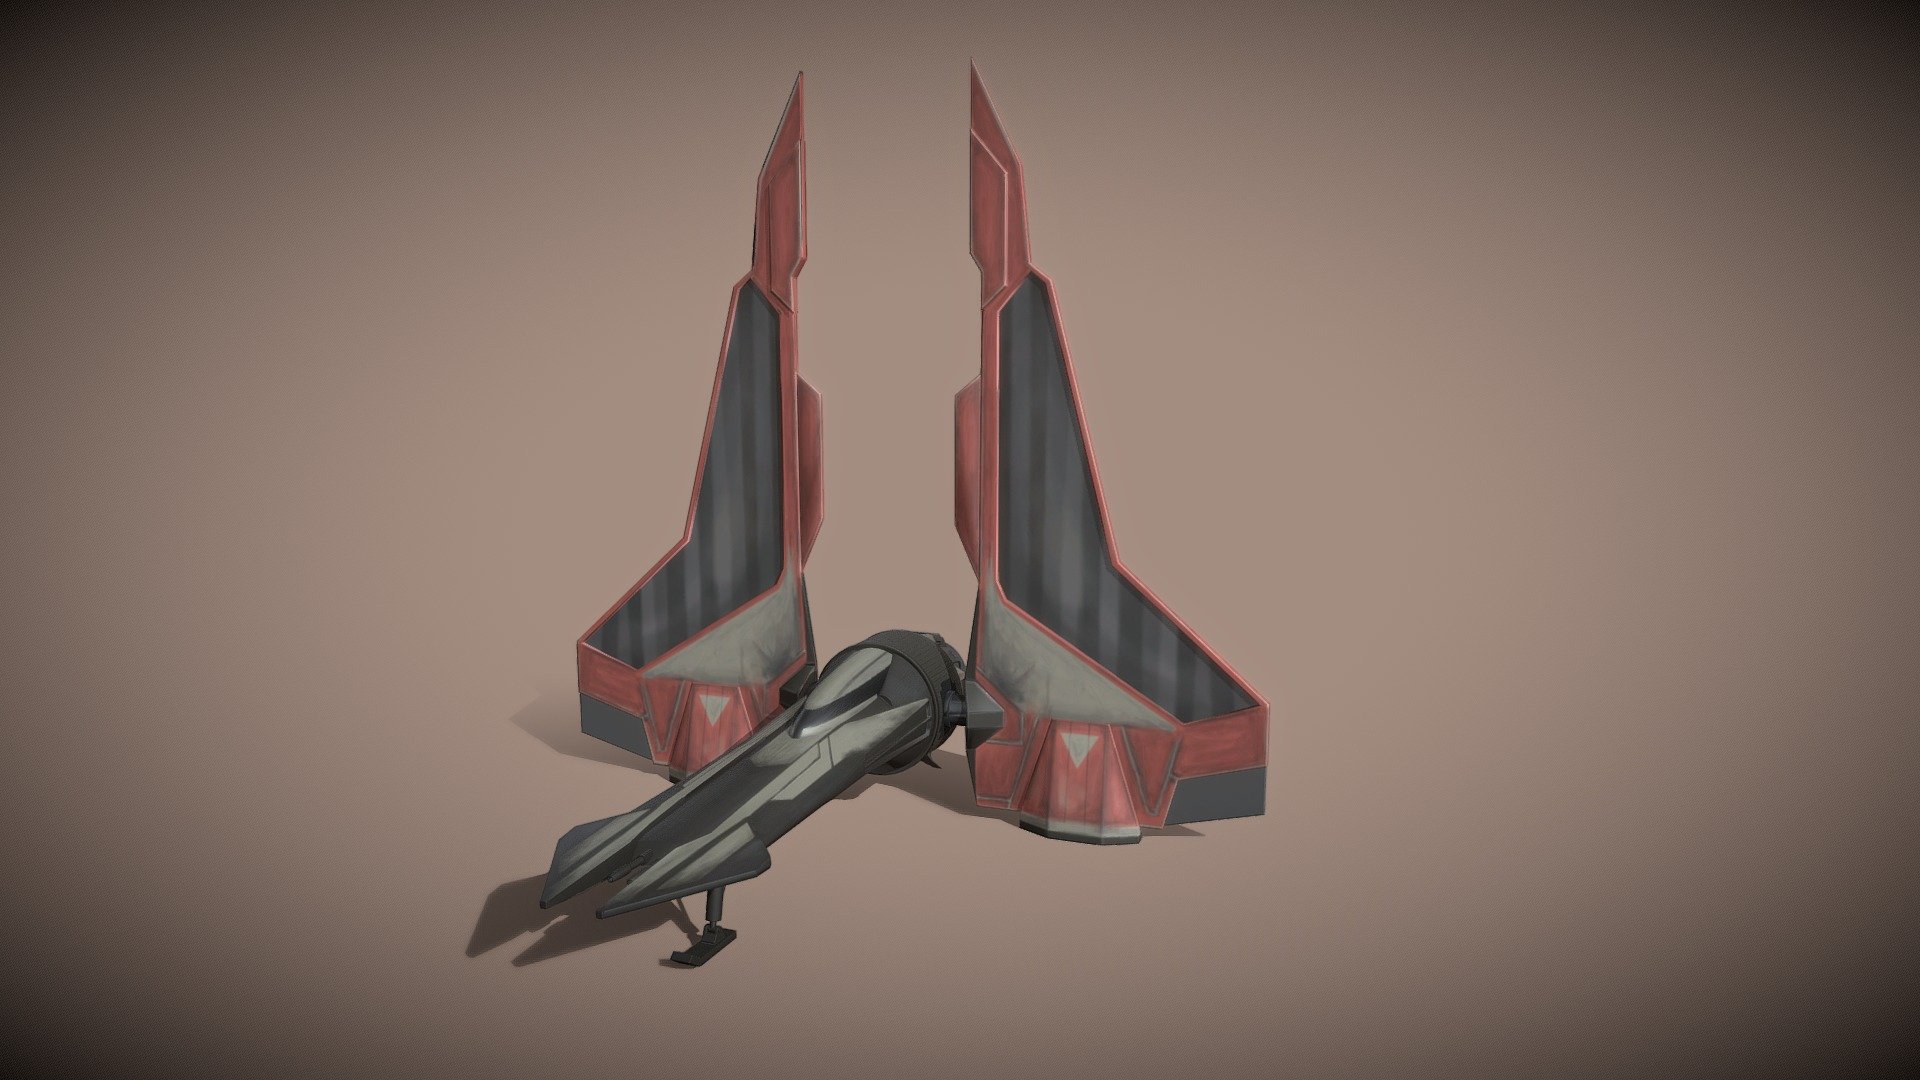 Fanart. Darth Maul's Gauntlet Fighter as shown in Star Wars: The Clone Wars TV Show. This asset was modelled and textured in Blender and is fully rigged.

I am selling this for $15 AUD.

Contact Details
Artstation: https://www.artstation.com/eddieroach 
Email and PayPal: eddie.roach751@gmail.com
Instagram: eddie_a_roach - Maul's Gauntlet Fighter | Fanart | Rig - 3D model by Eddie Roach (@eddie.roach) 3d model